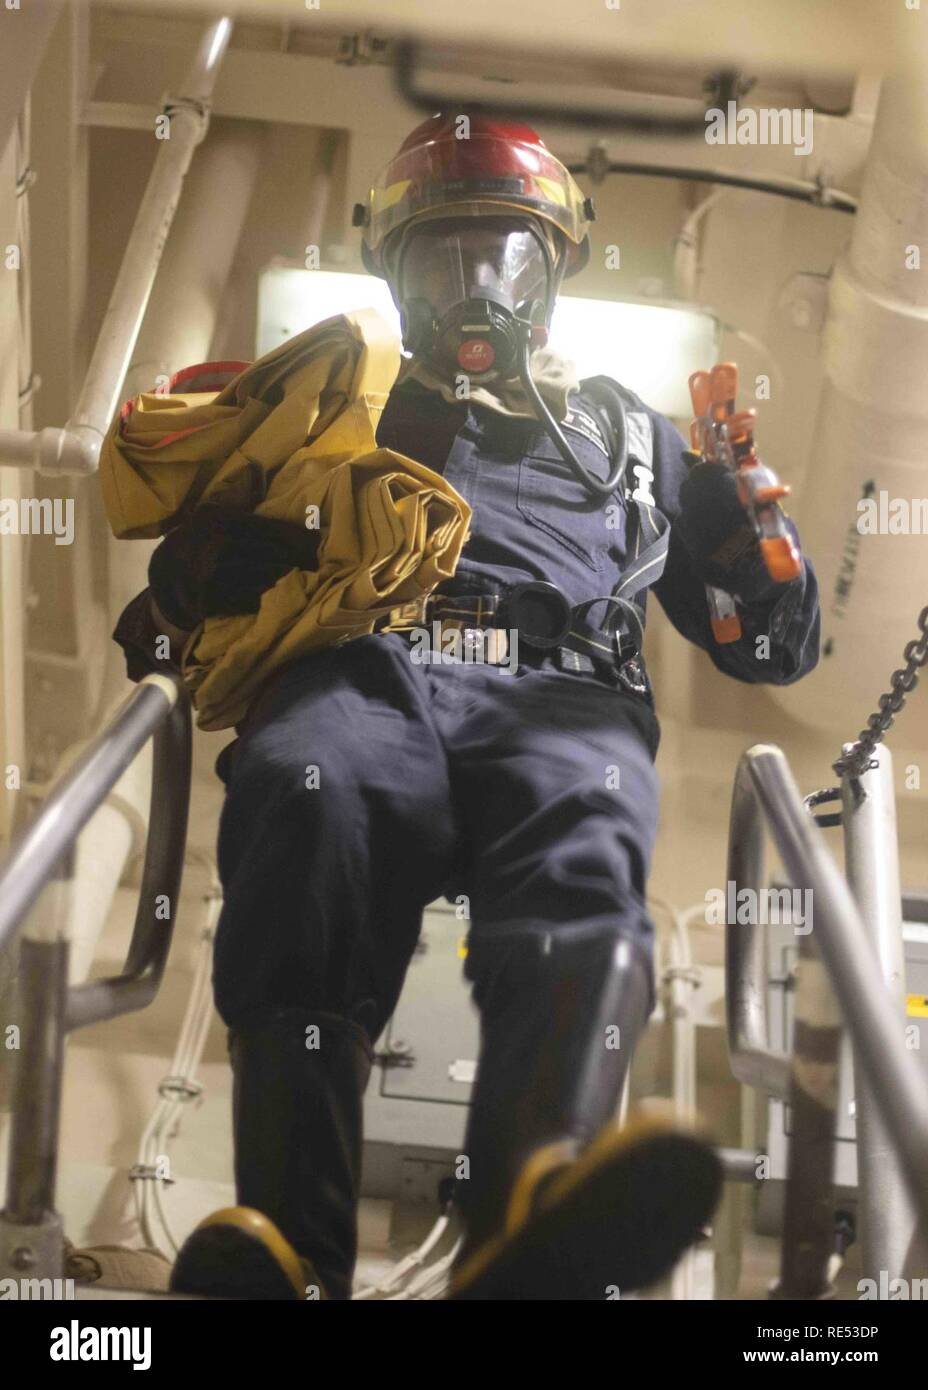 MEDITERRANEAN SEA (Jan. 4, 2019) Boatswain’s Mate 1st Class Ivan Godinez responds to a simulated fire during a damage control drill aboard amphibious transport dock ship USS Arlington (LPD 24). Arlington is making a scheduled deployment as part of the Kearsarge Amphibious Ready Group in support of maritime security operations, crisis response and theater security cooperation, while also providing a forward naval presence. Stock Photo